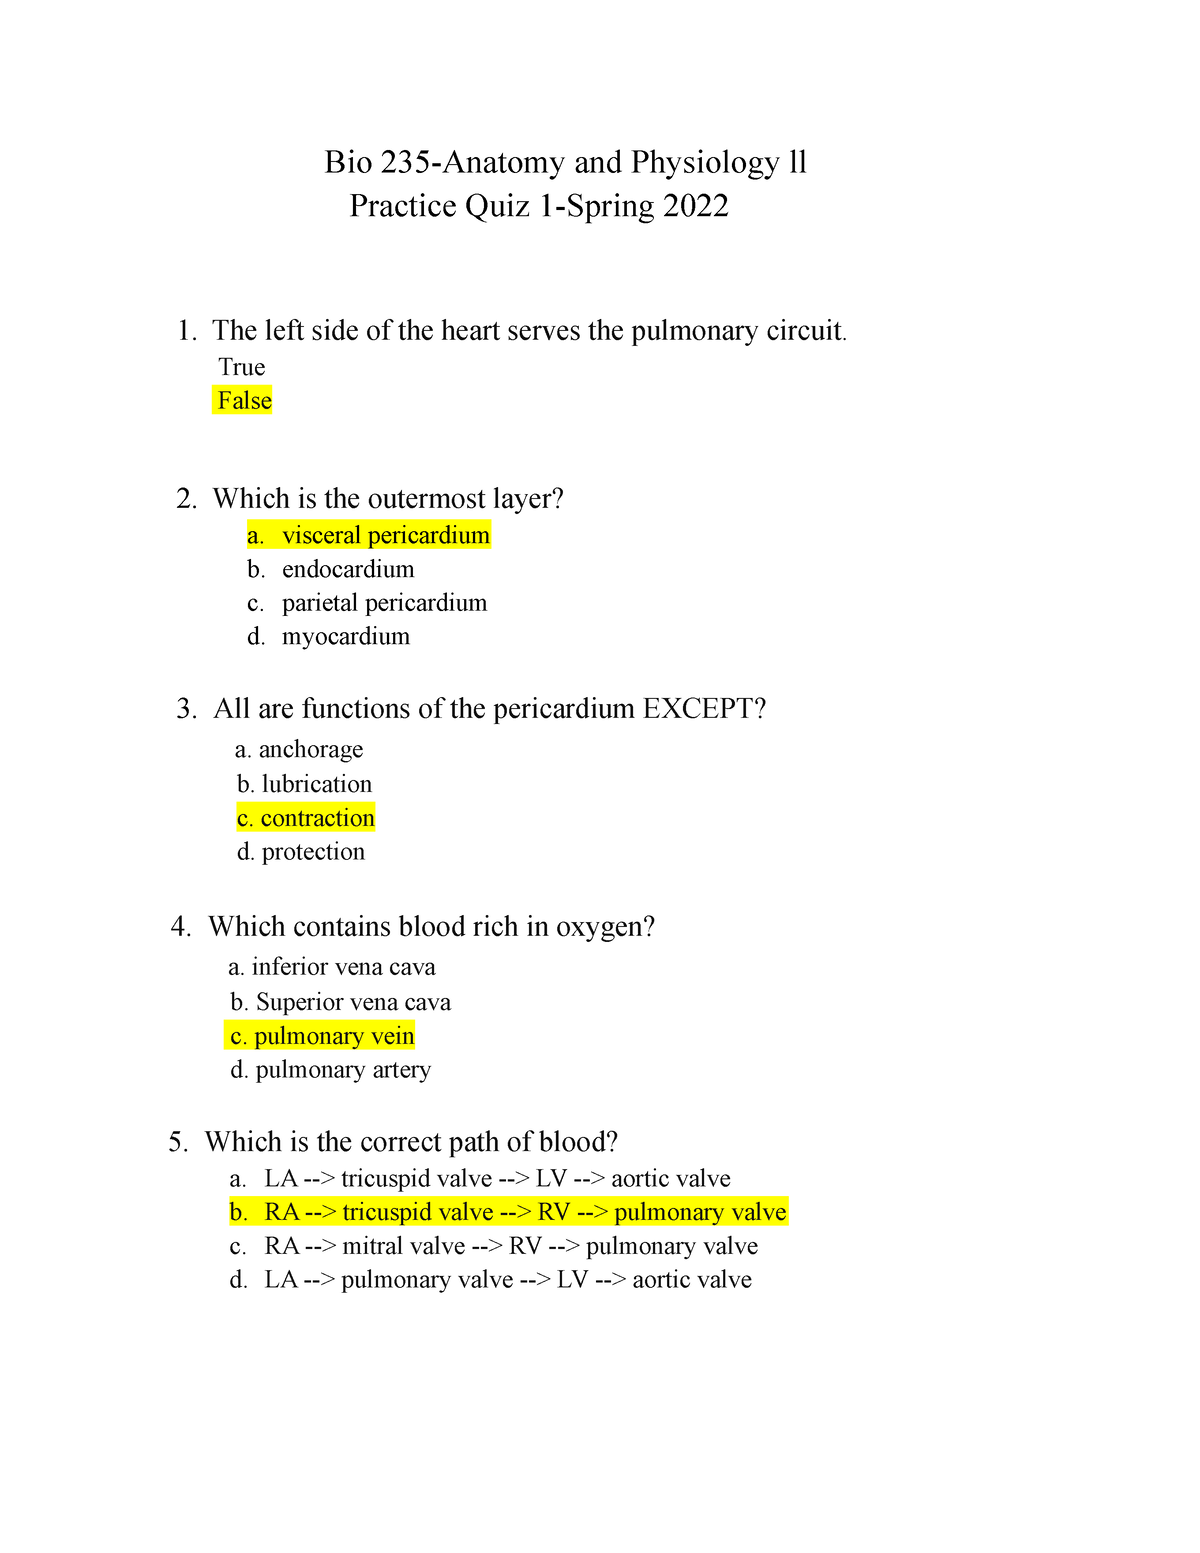 introduction to anatomy and physiology assignment quizlet